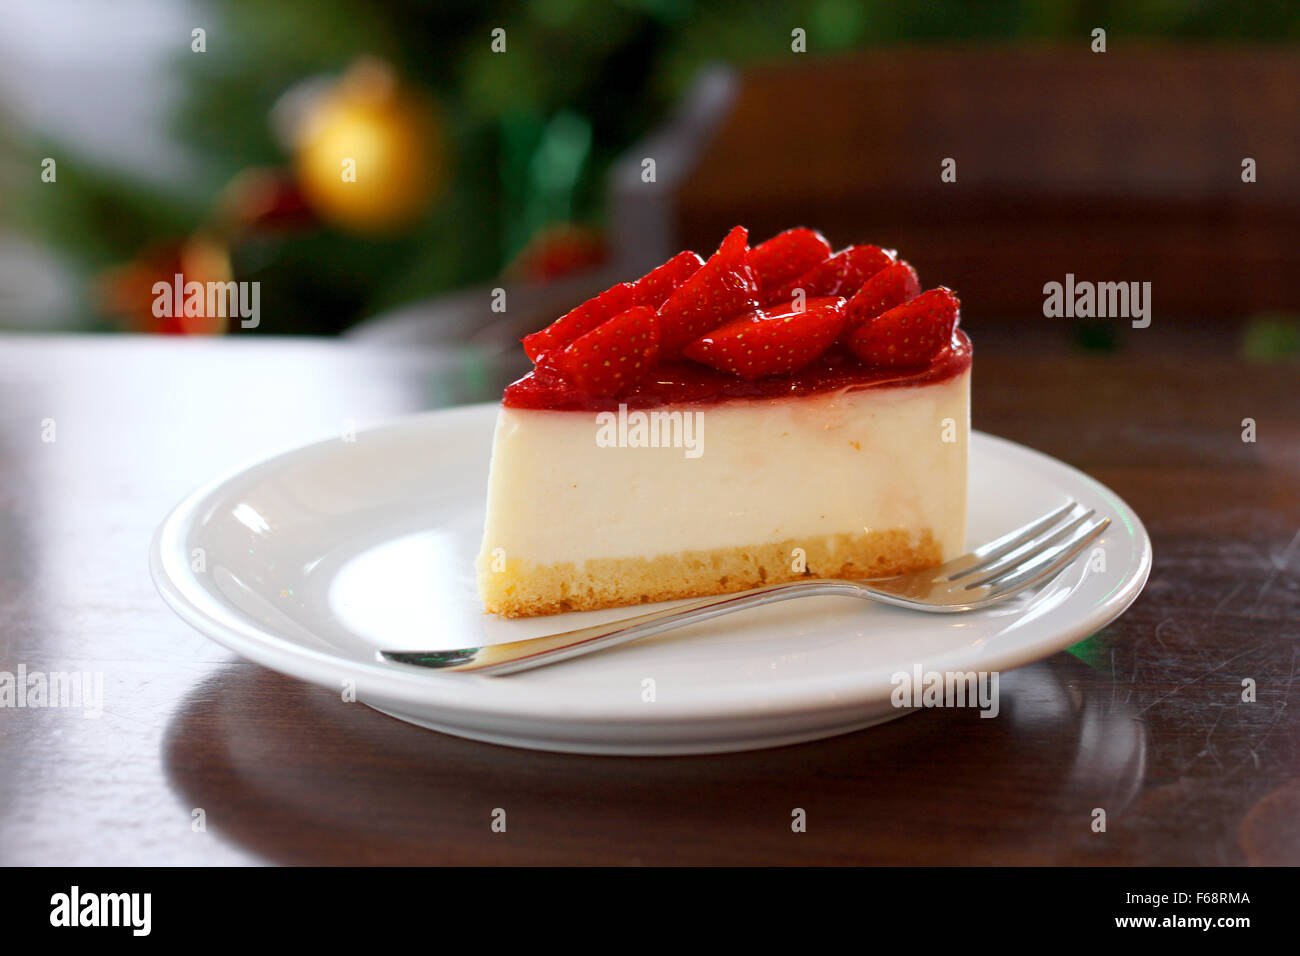 Fresh strawberry cheesecake. Selective Focus on the front upper edge of cake. Christmas tree in background Stock Photo